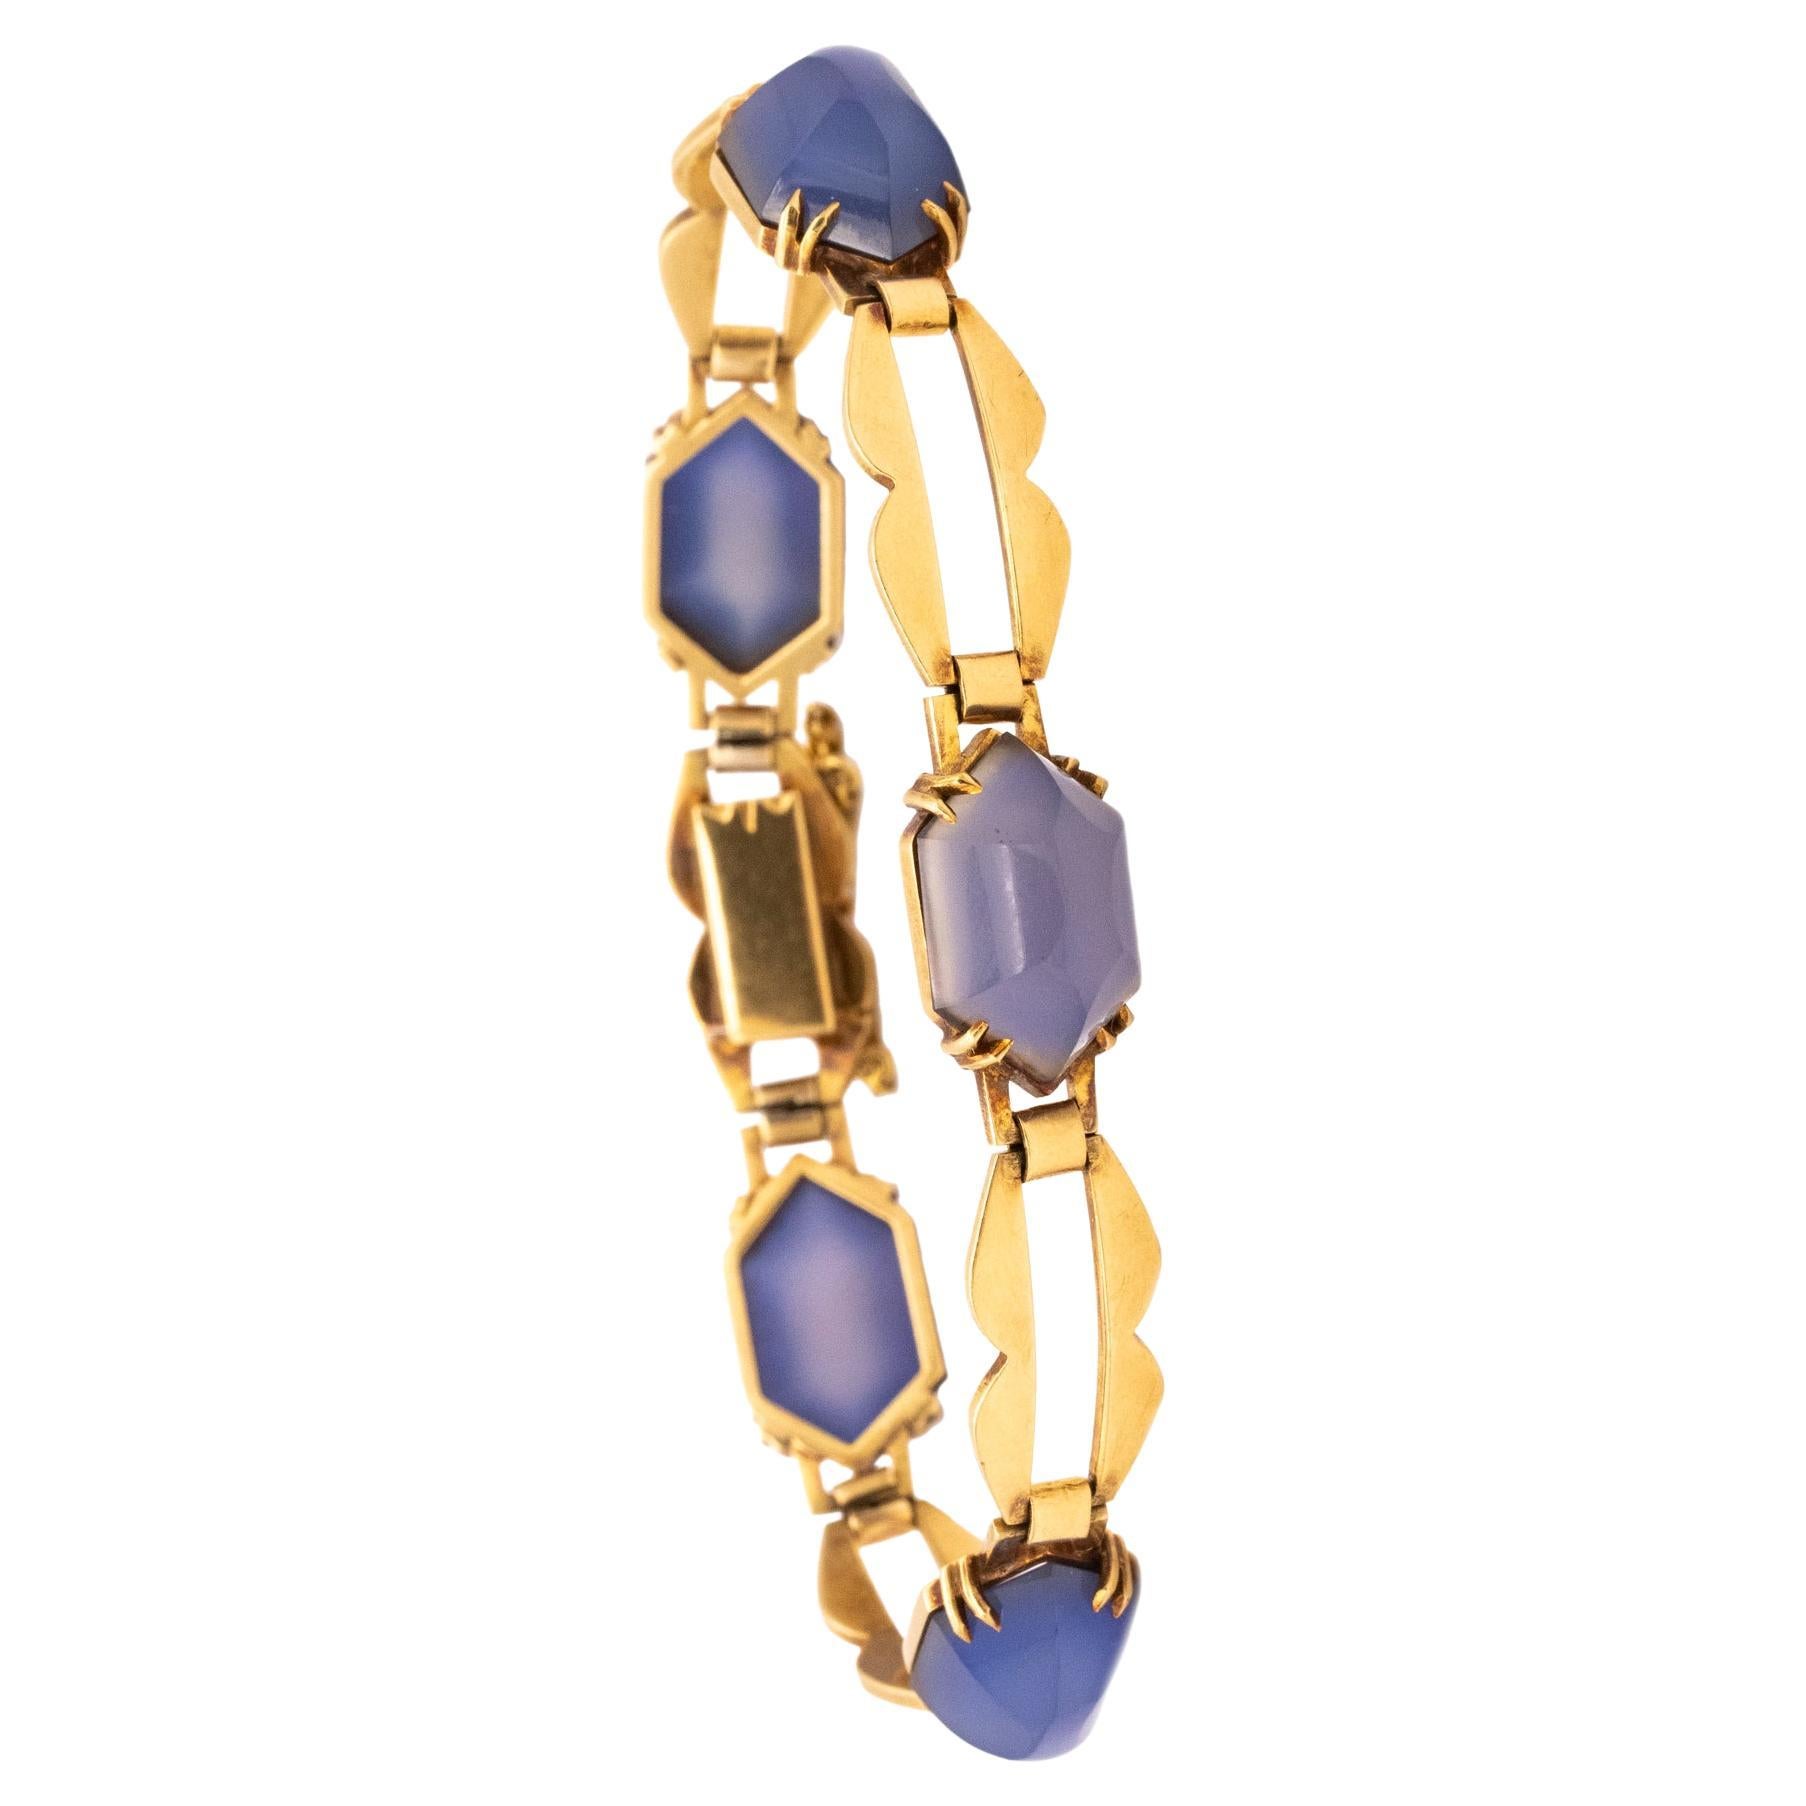 French 1930 Art Deco Bracelet In 18Kt Yellow Gold With 35 Cts Of Blue Chalcedony For Sale